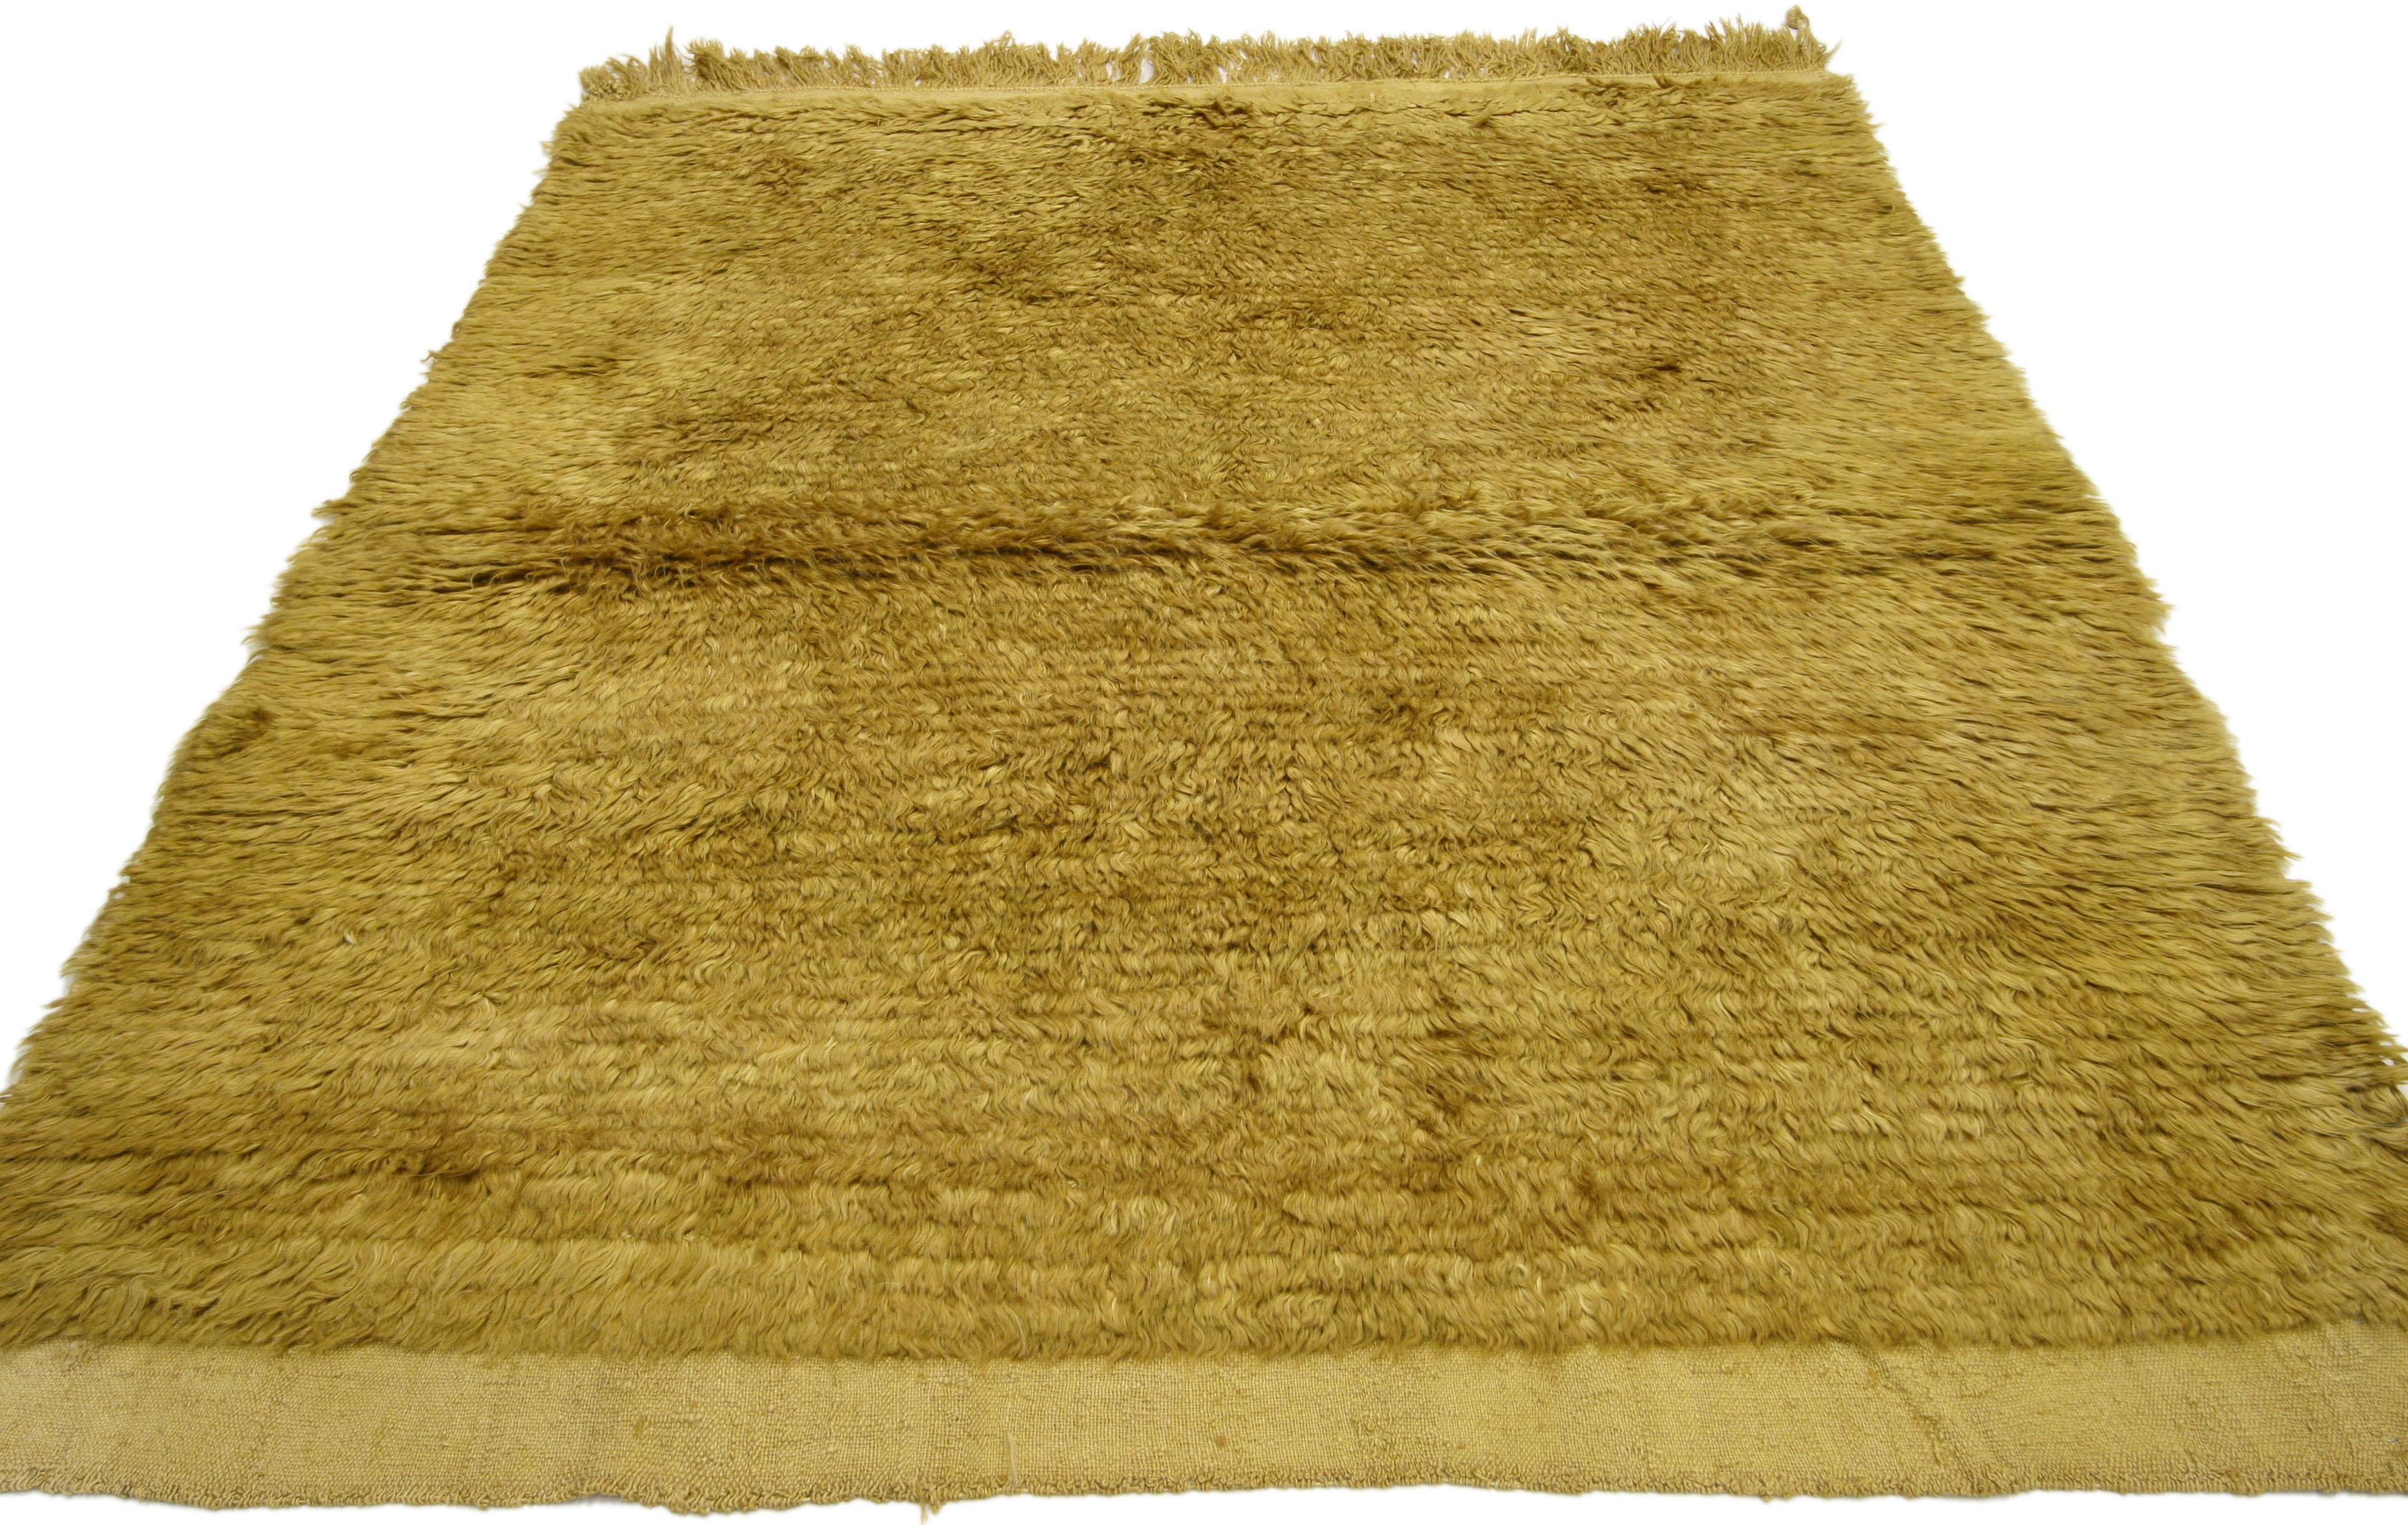 73979, Mid-Century Modern style vintage Turkish rug, Angora wool. This vintage Turkish rug is made of angora wool rendered in variegated shades of goldenrod, saffron, brass, golden Tuscan sun, granola, biscotti and fawn. This hand-knotted angora